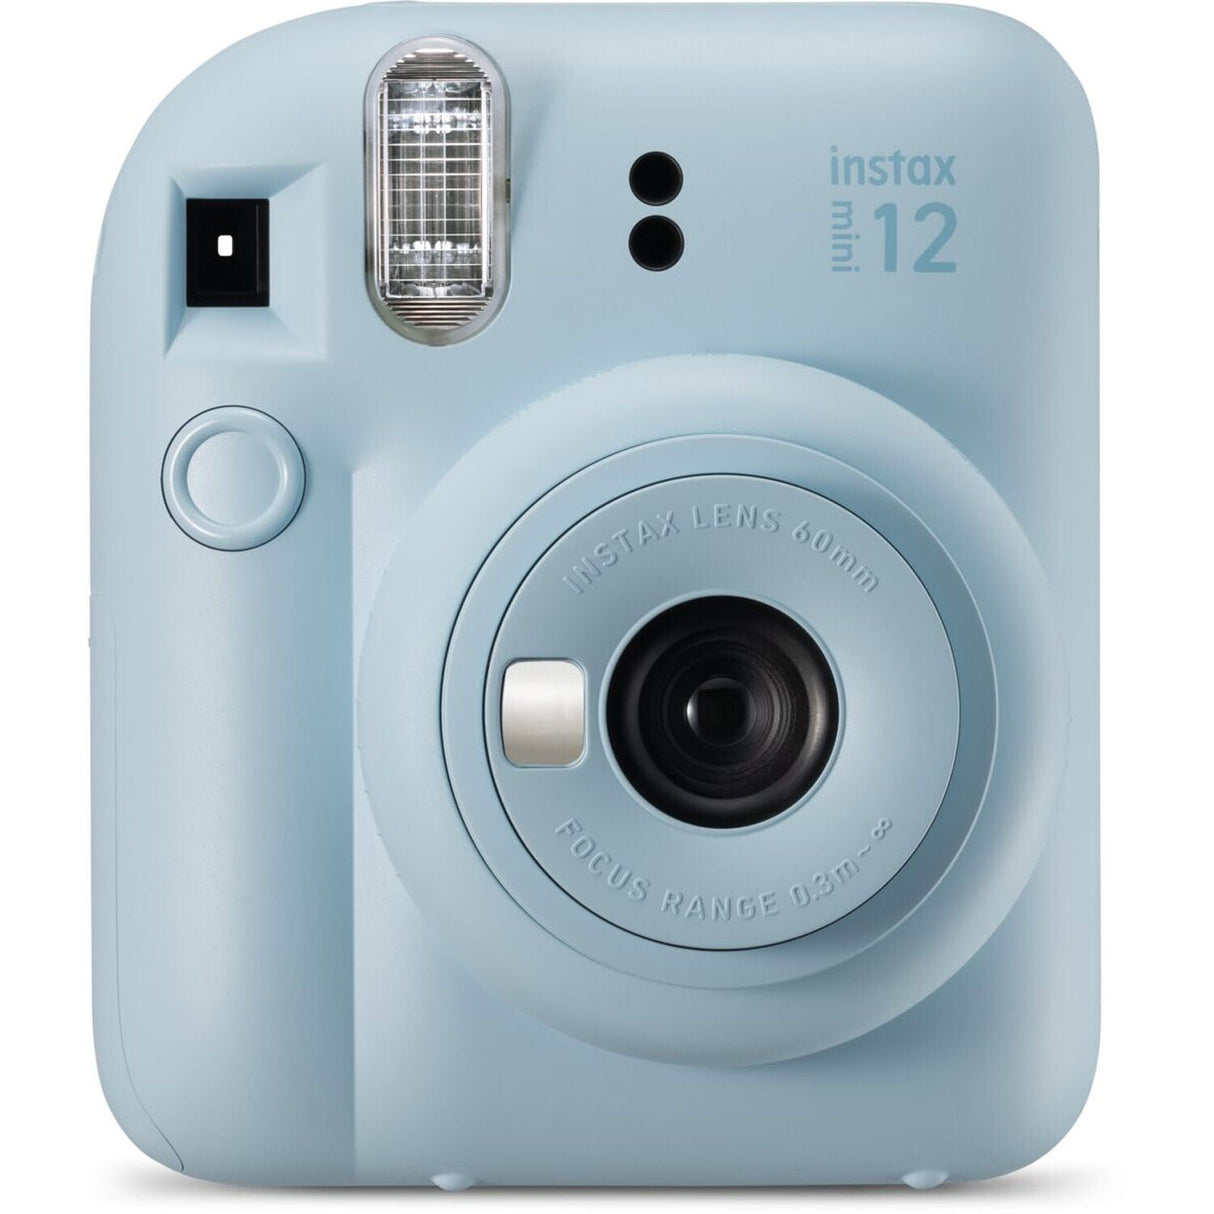 FUJIFILM INSTAX Mini 12 Instant Film Camera with 10X1 Pack of Instant Film With Blue Pouch Kit (Pastel Blue, 10 Exposures)